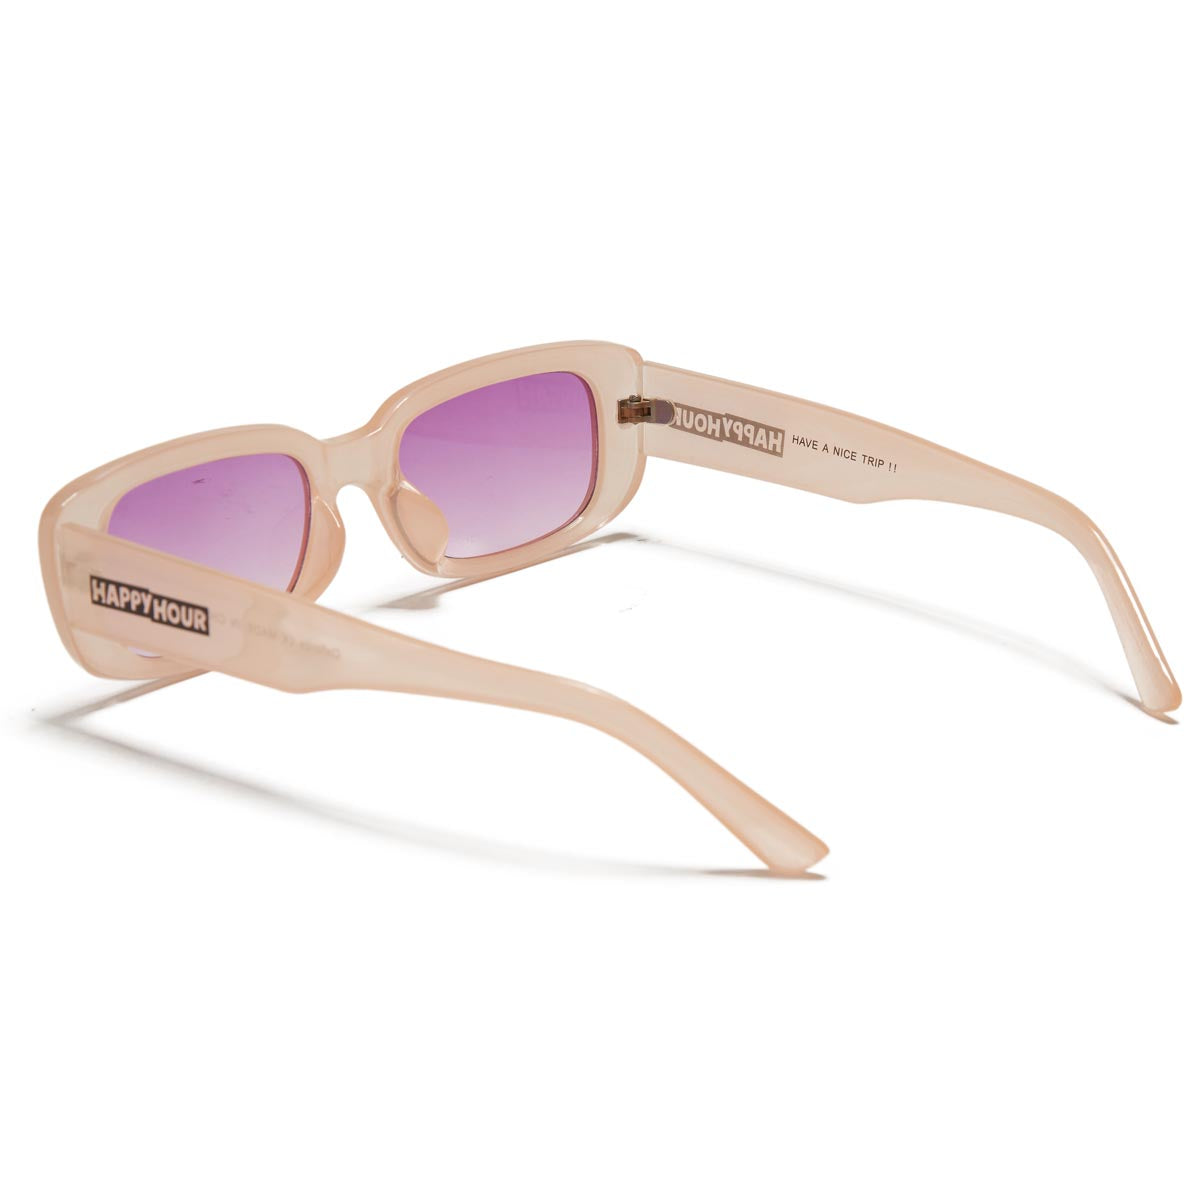 Happy Hour Oxford Sunglasses - Peach Party image 2